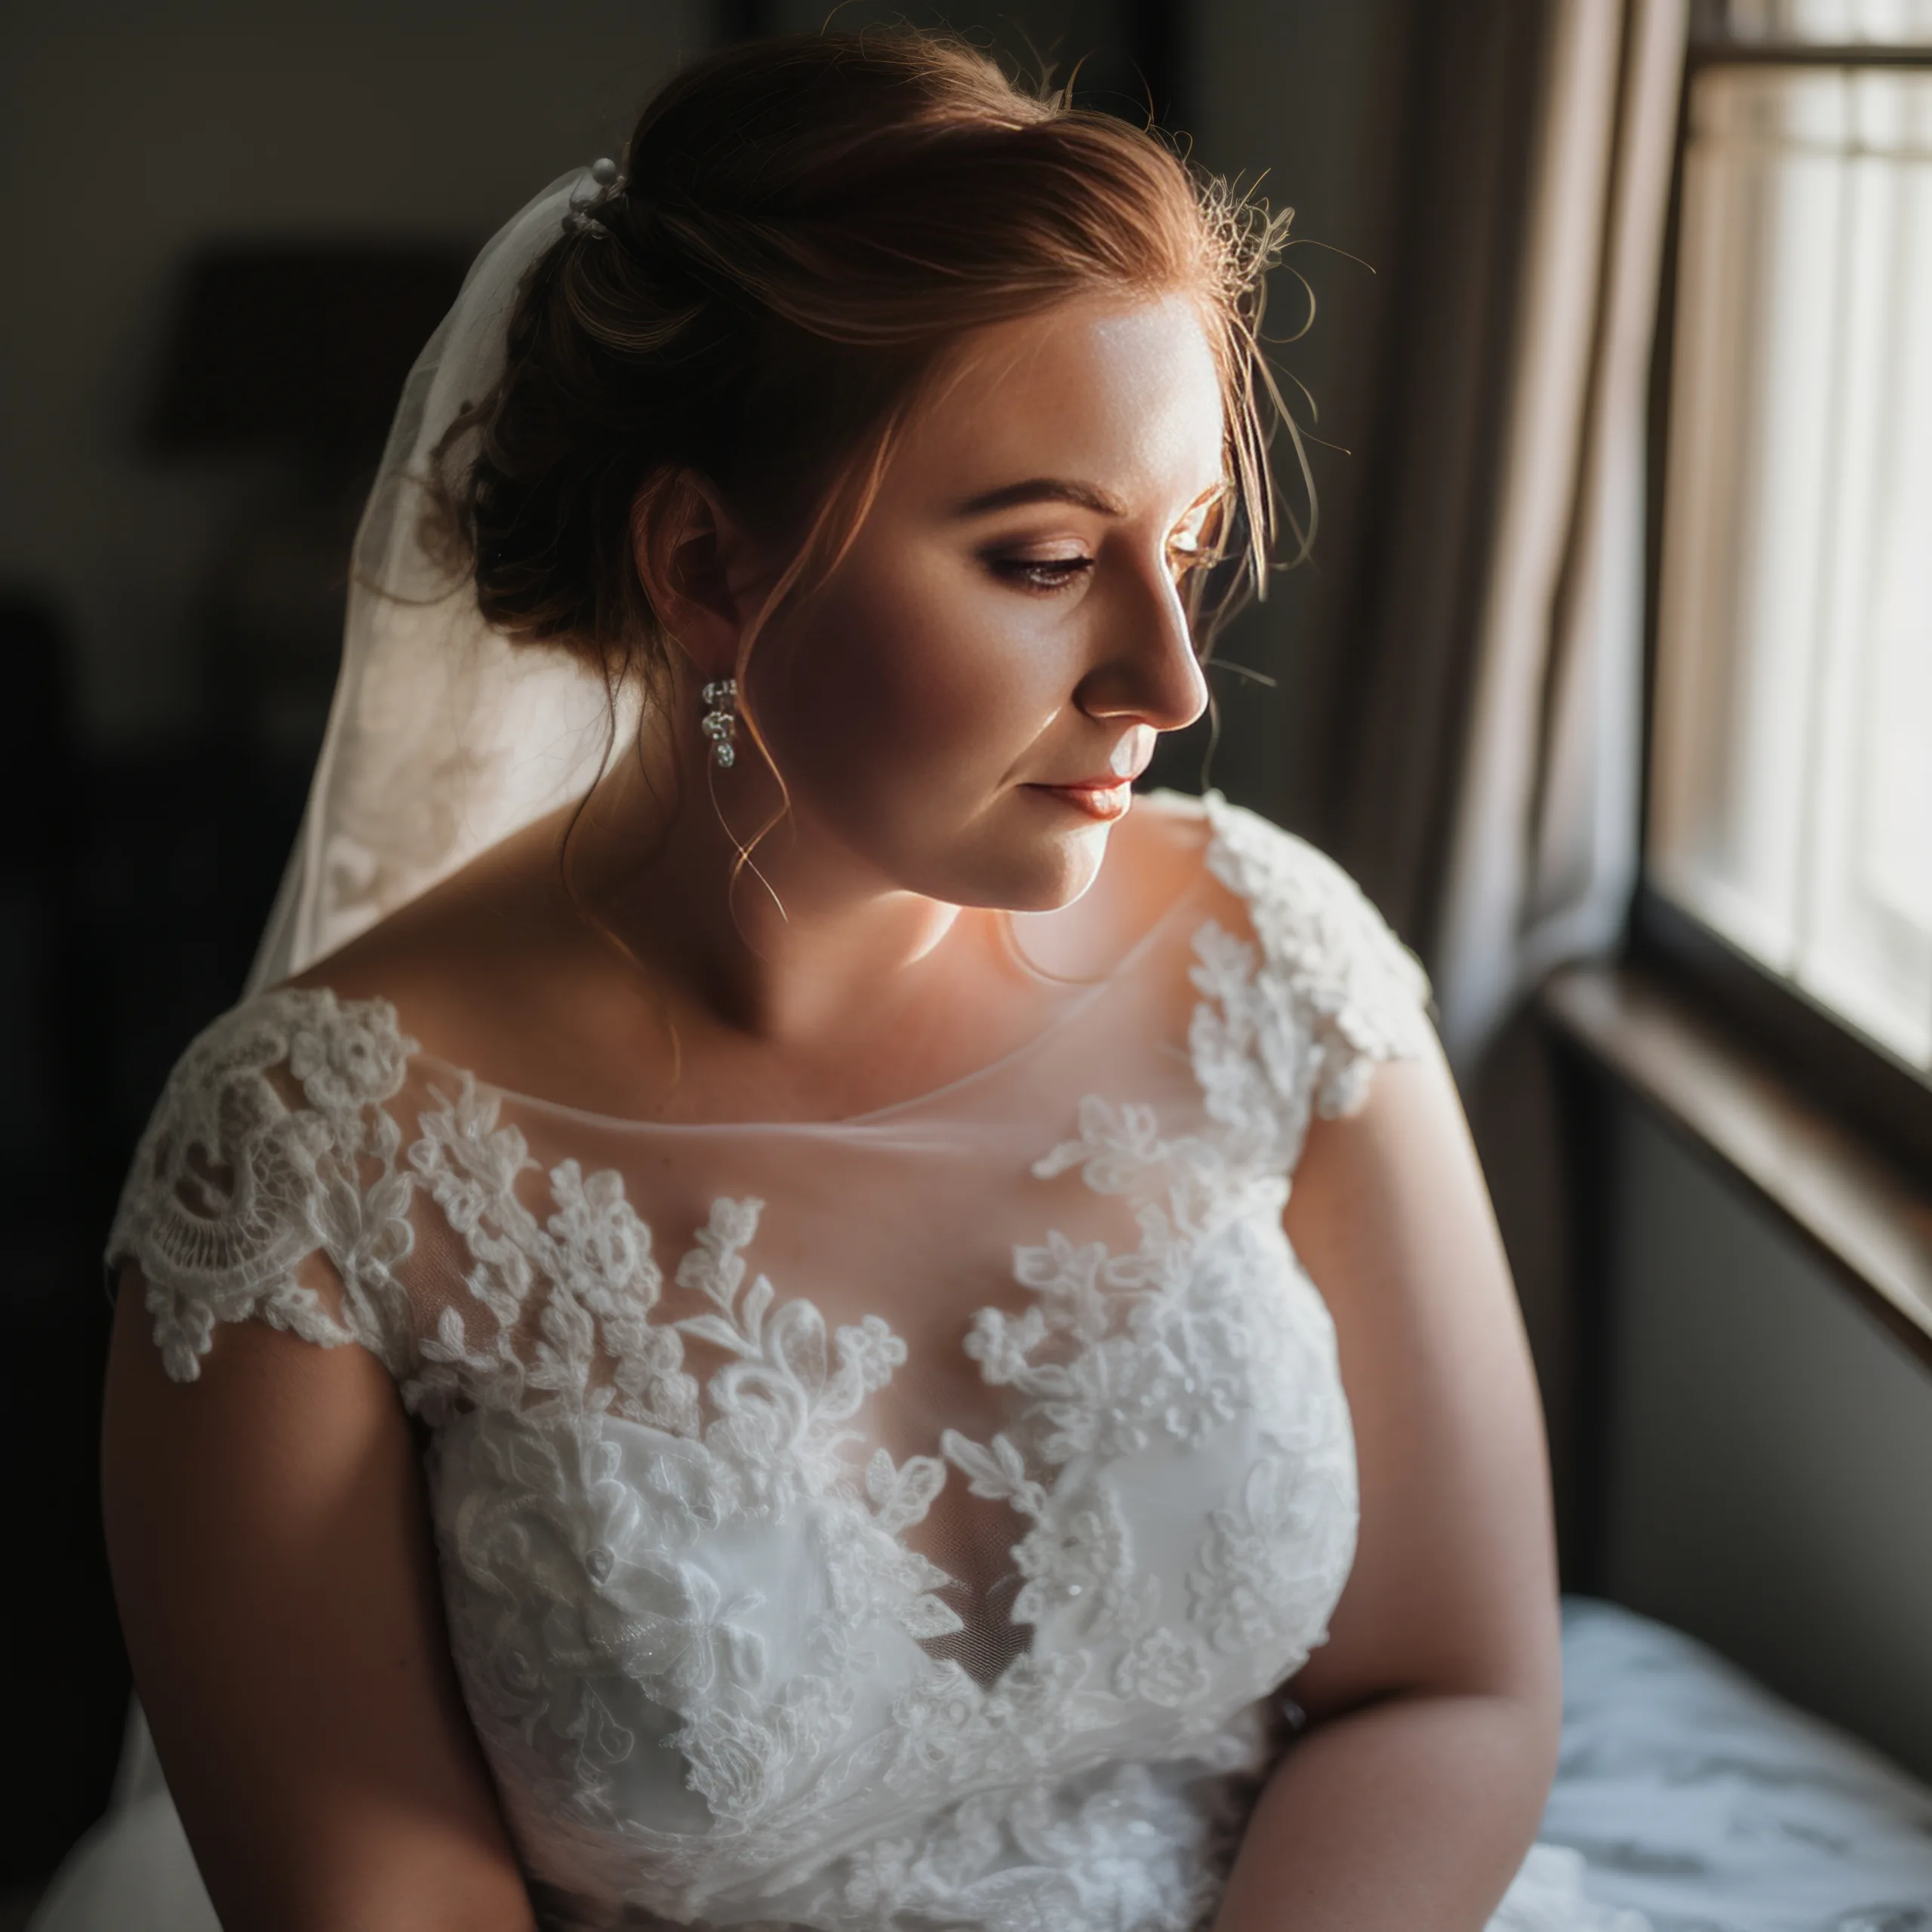 The more curvy Bride:a woman in a wedding dress looking out a window.